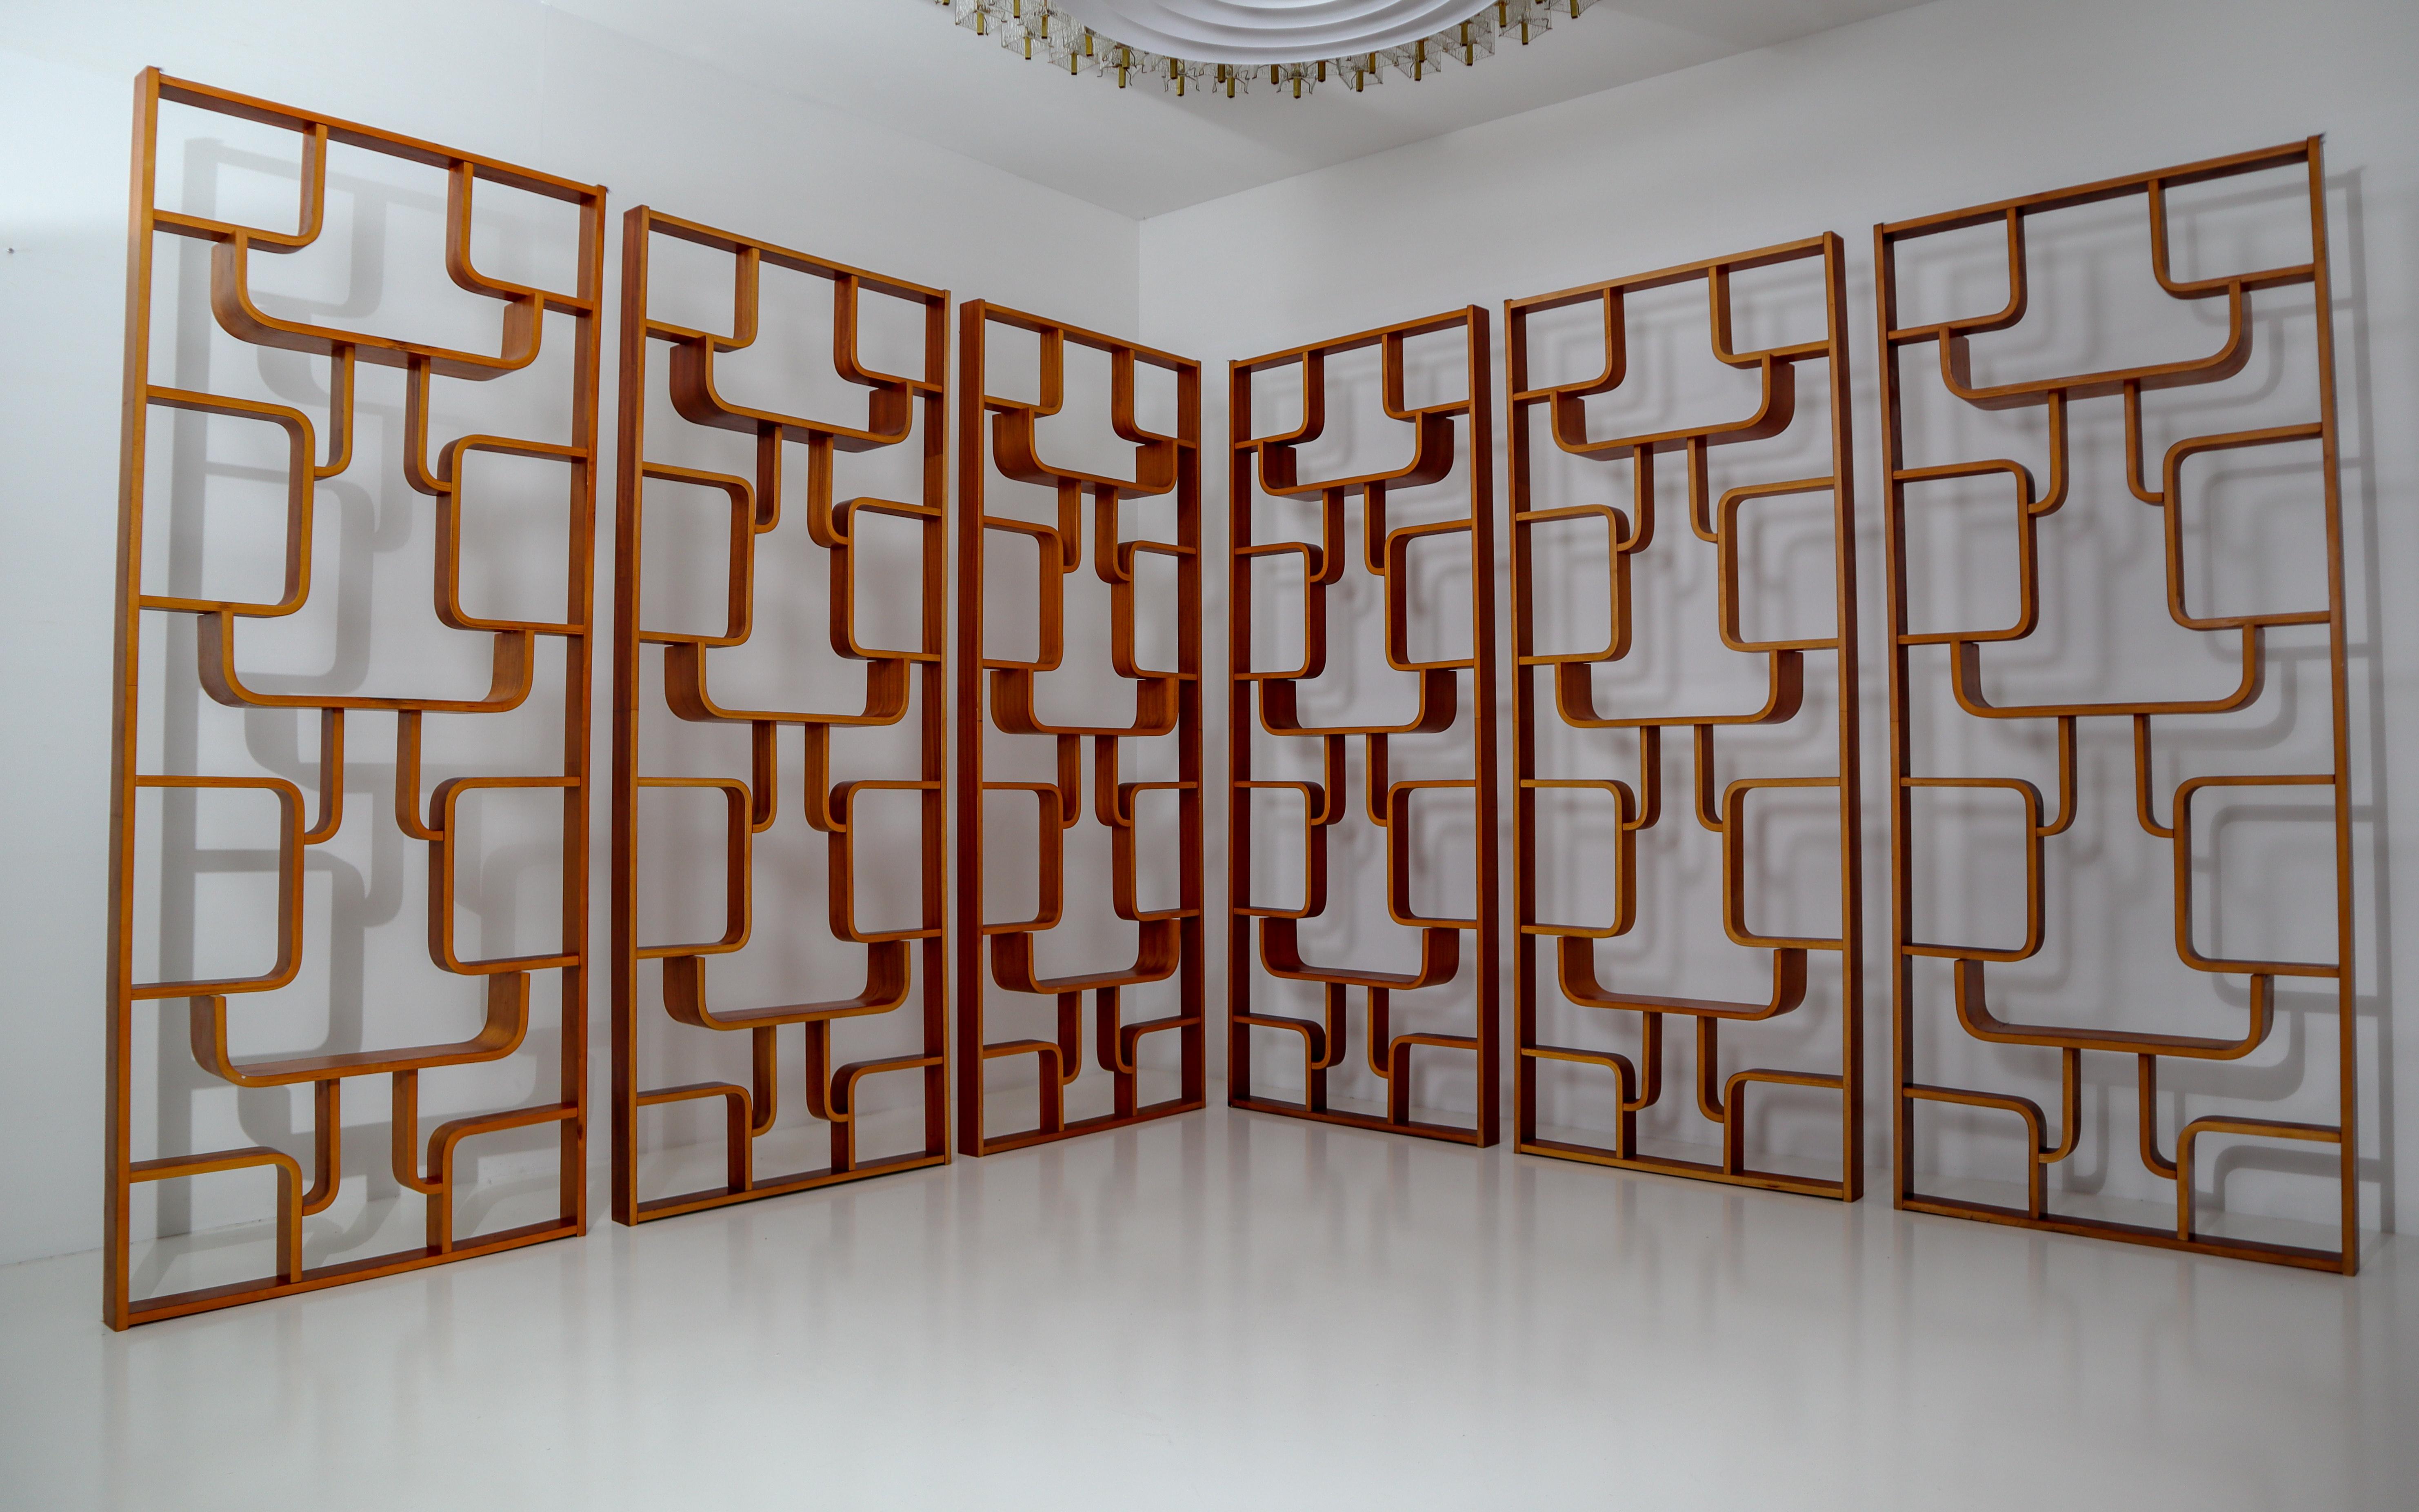 Midcentury flower (dividing) wall made of bent mahogany color plywood and features geometric patterns, designed by Ludvik Volak in the Czech Republic in the 1950s-1960s and manufactured by Thonet.
Amazing good condition and wonderful warm patina.